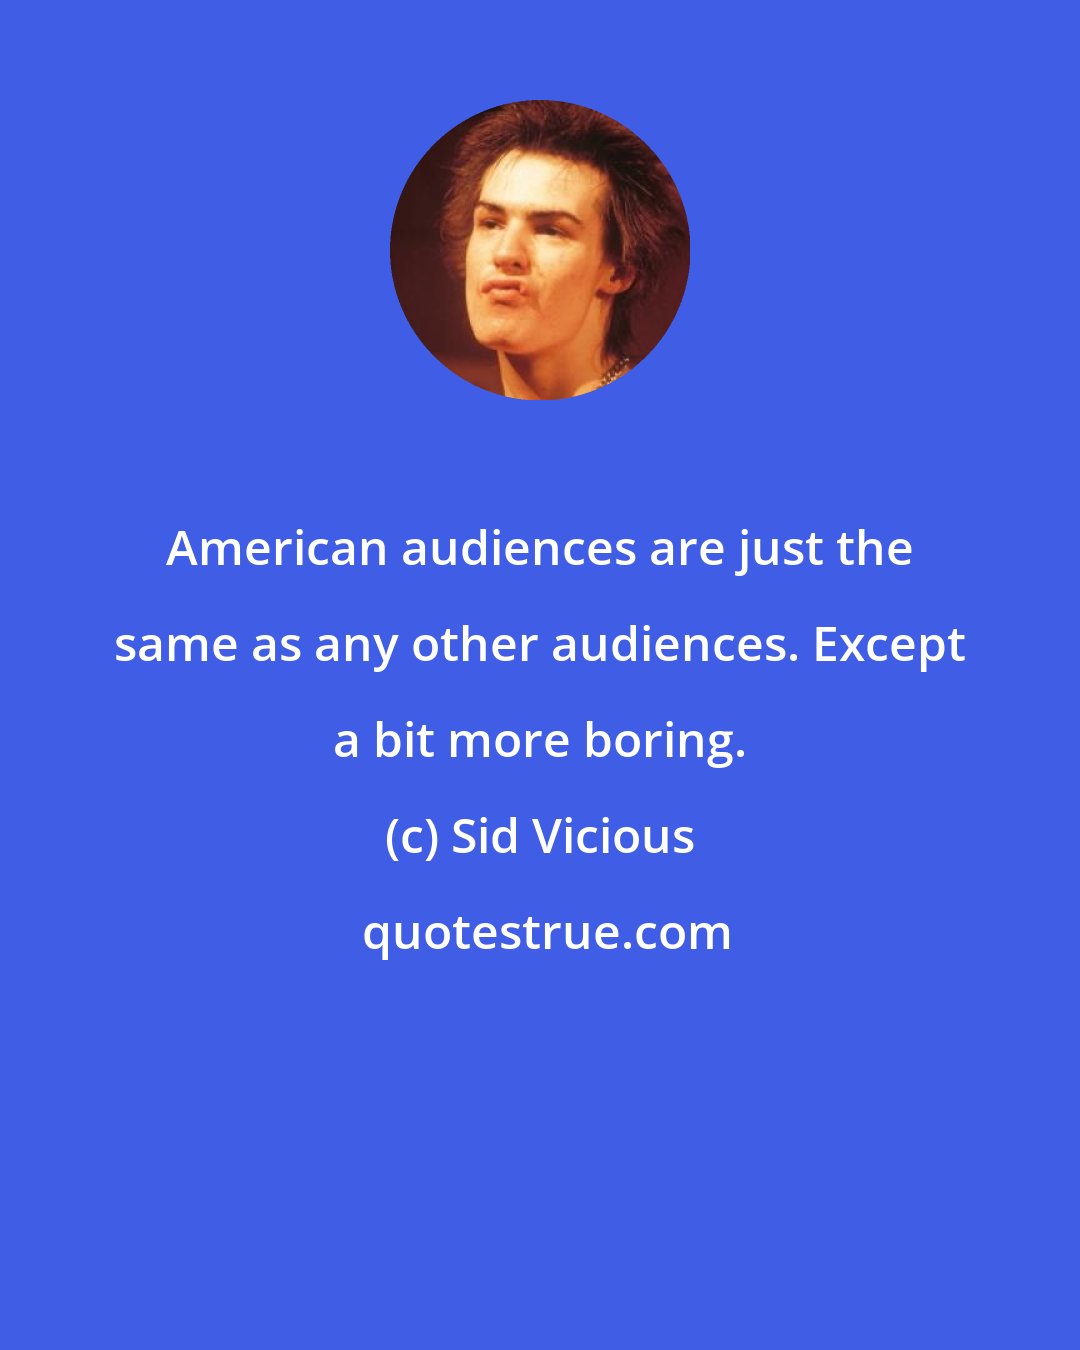 Sid Vicious: American audiences are just the same as any other audiences. Except a bit more boring.